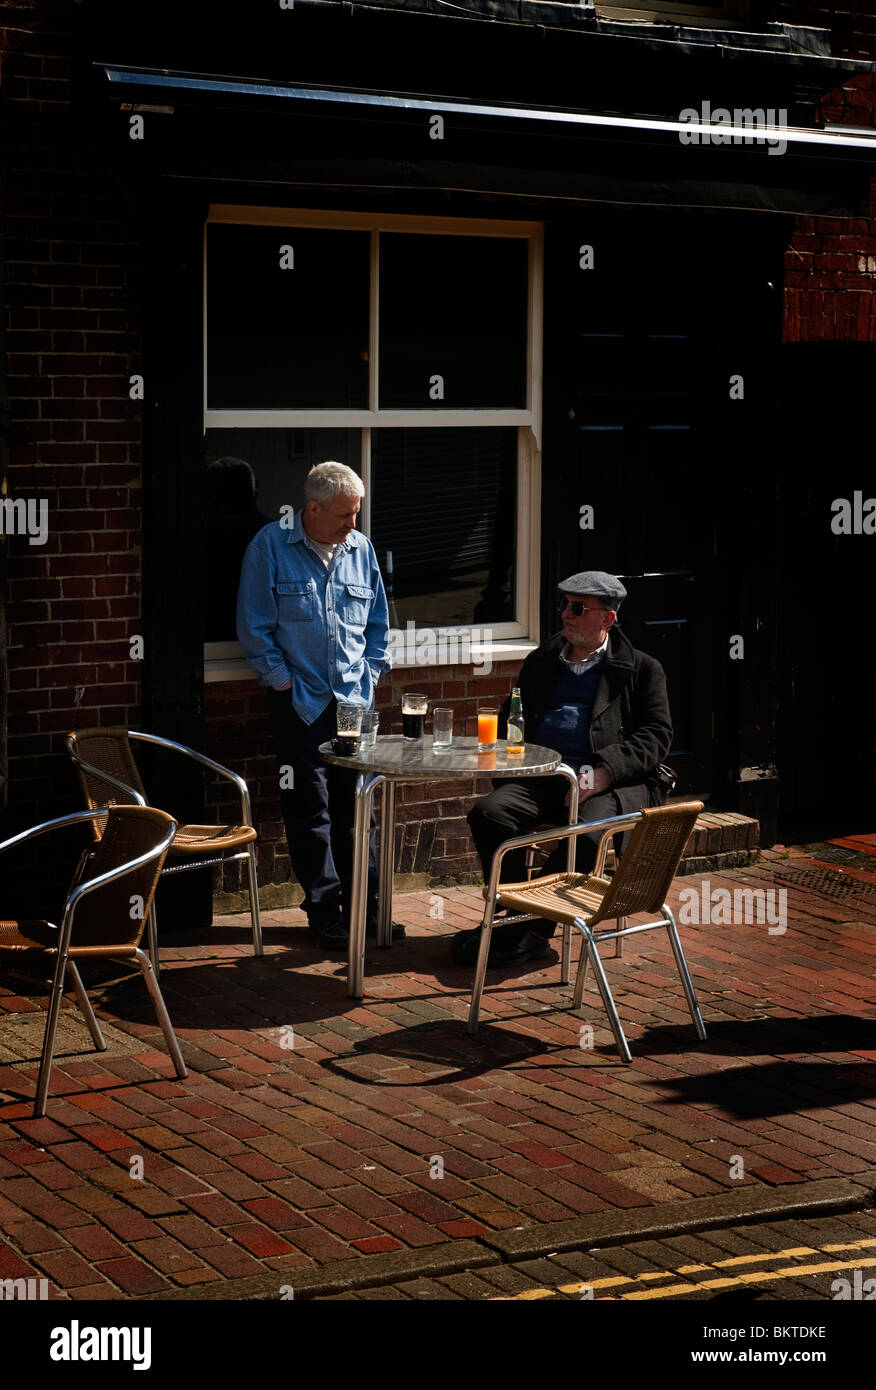 Two middle aged male adult men sitting at table and chairs outside a Brighton pub Stock Photo